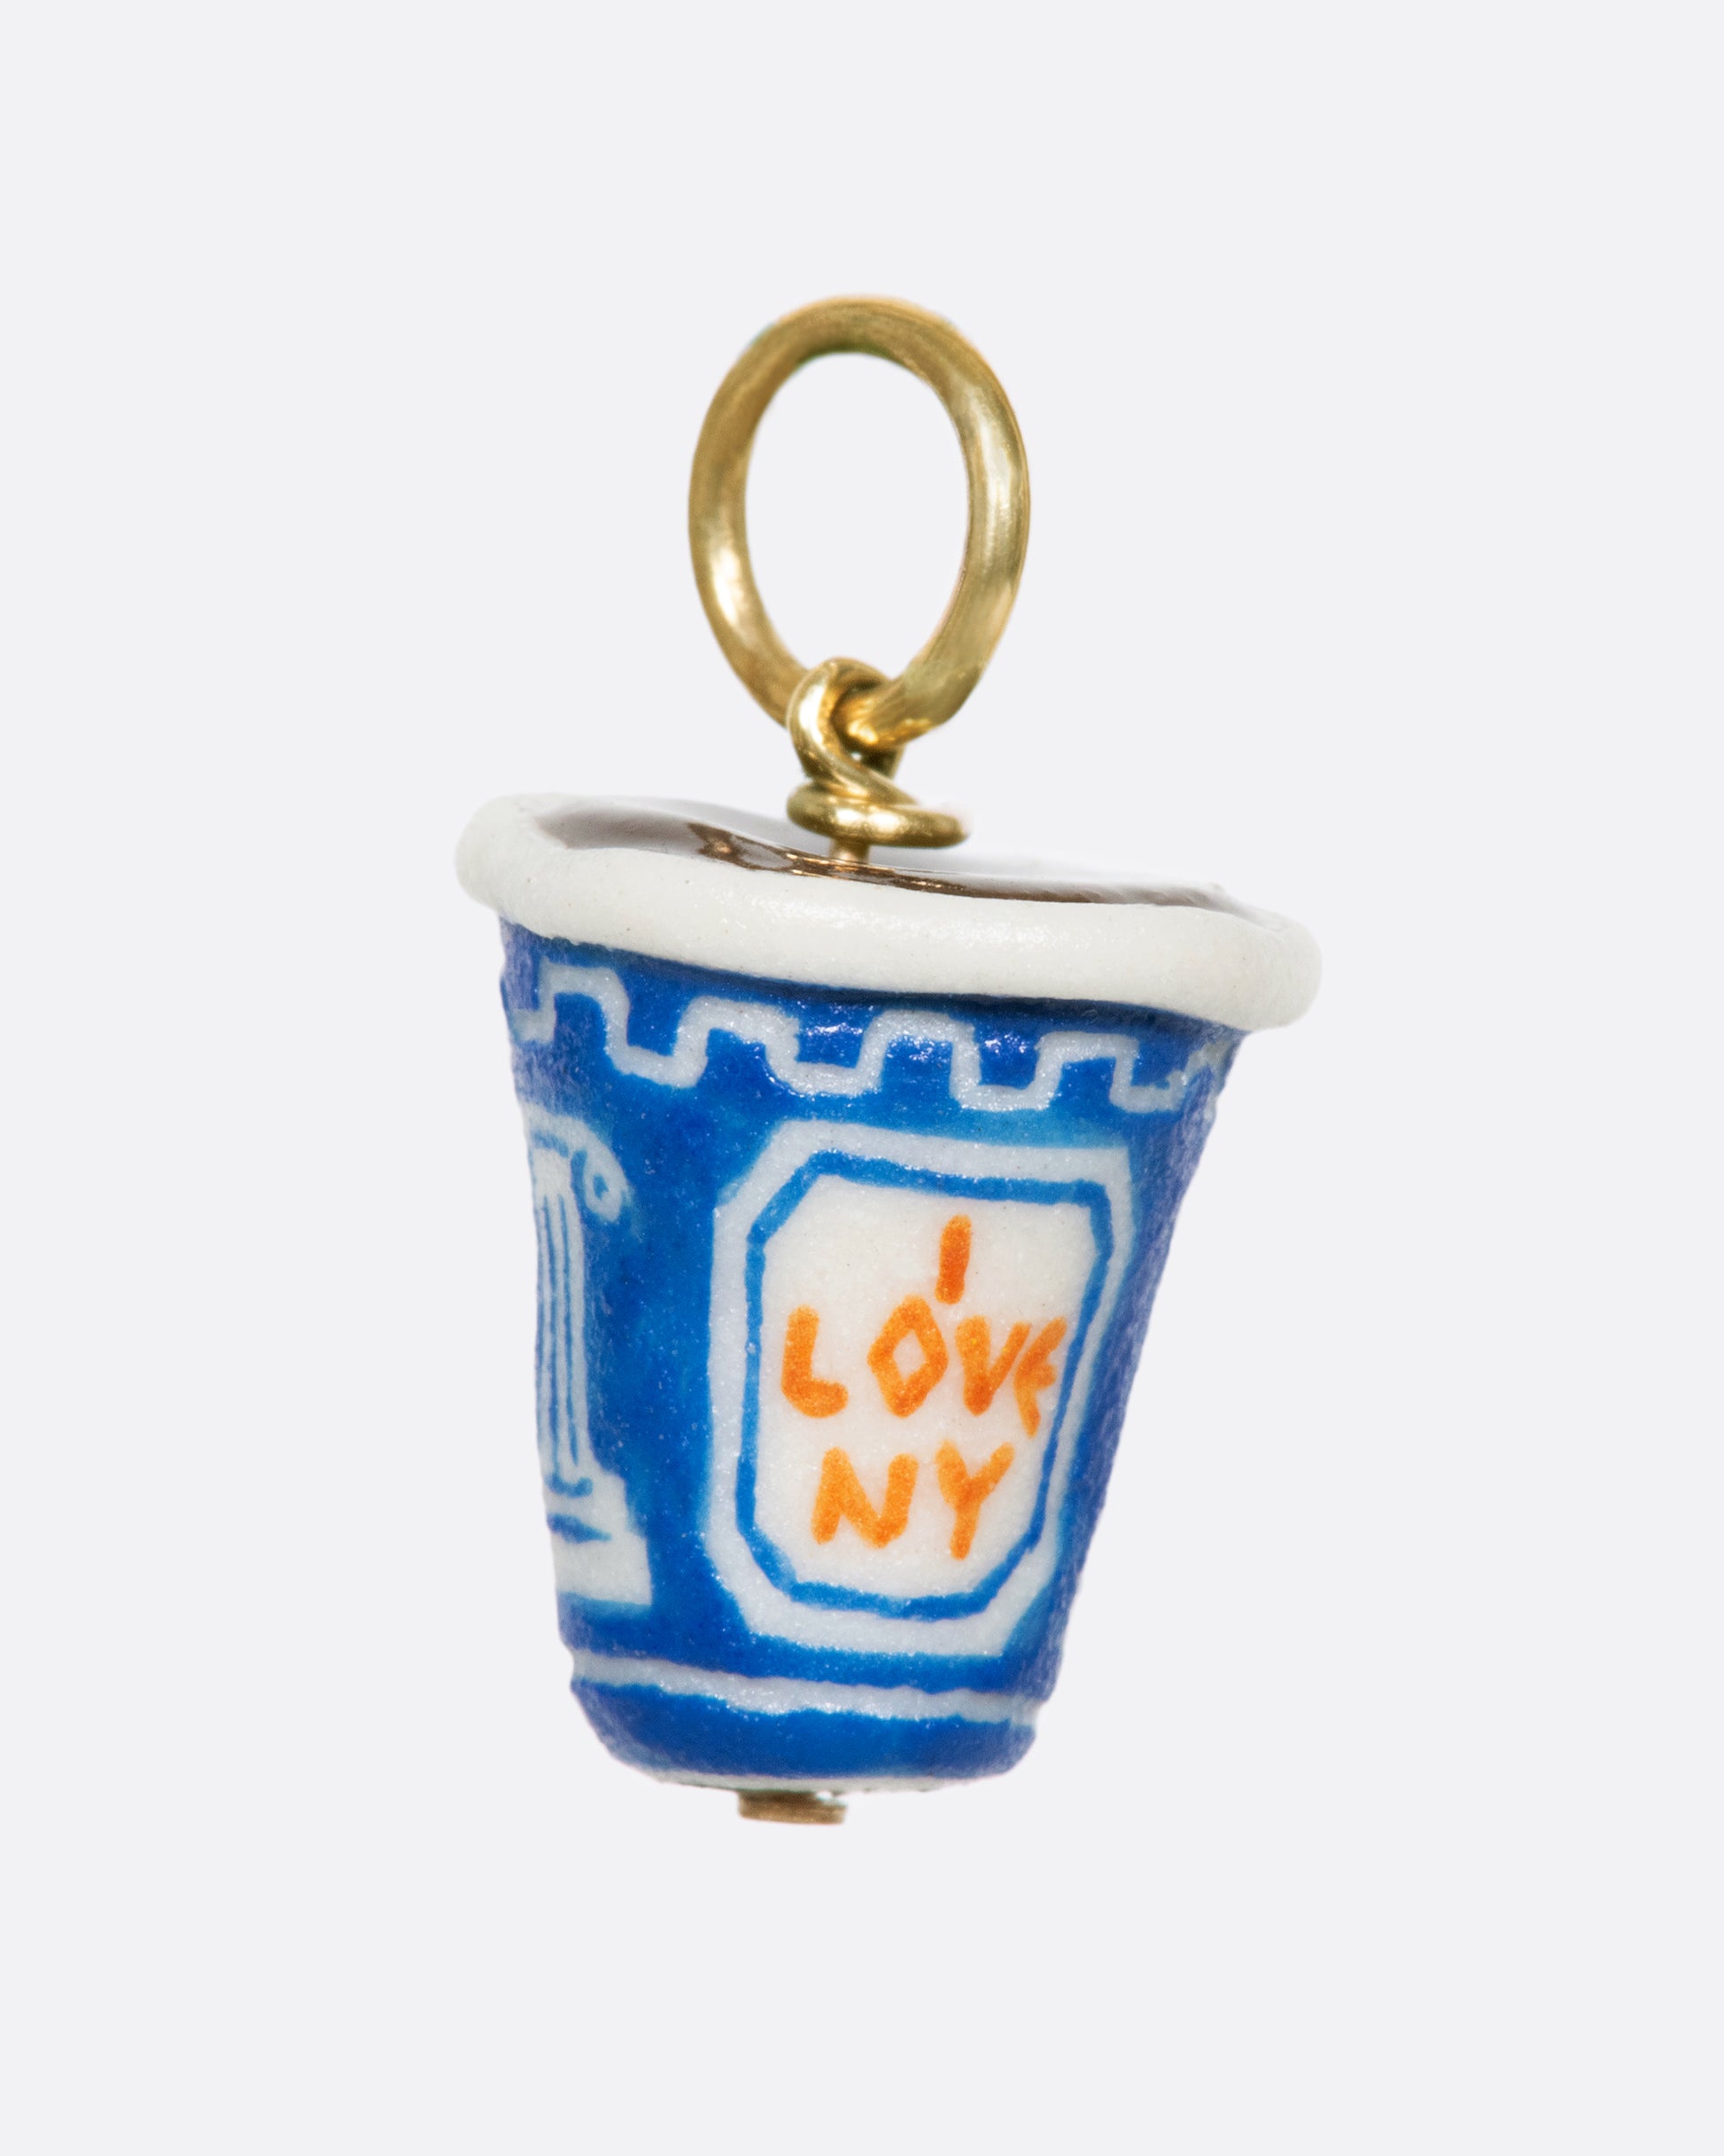 You can't get more NYC than this iconic to-go coffee cup. Look closely at this handmade and painted porcelain charm, and you'll find "I love NY" skillfully painted in tiny letters